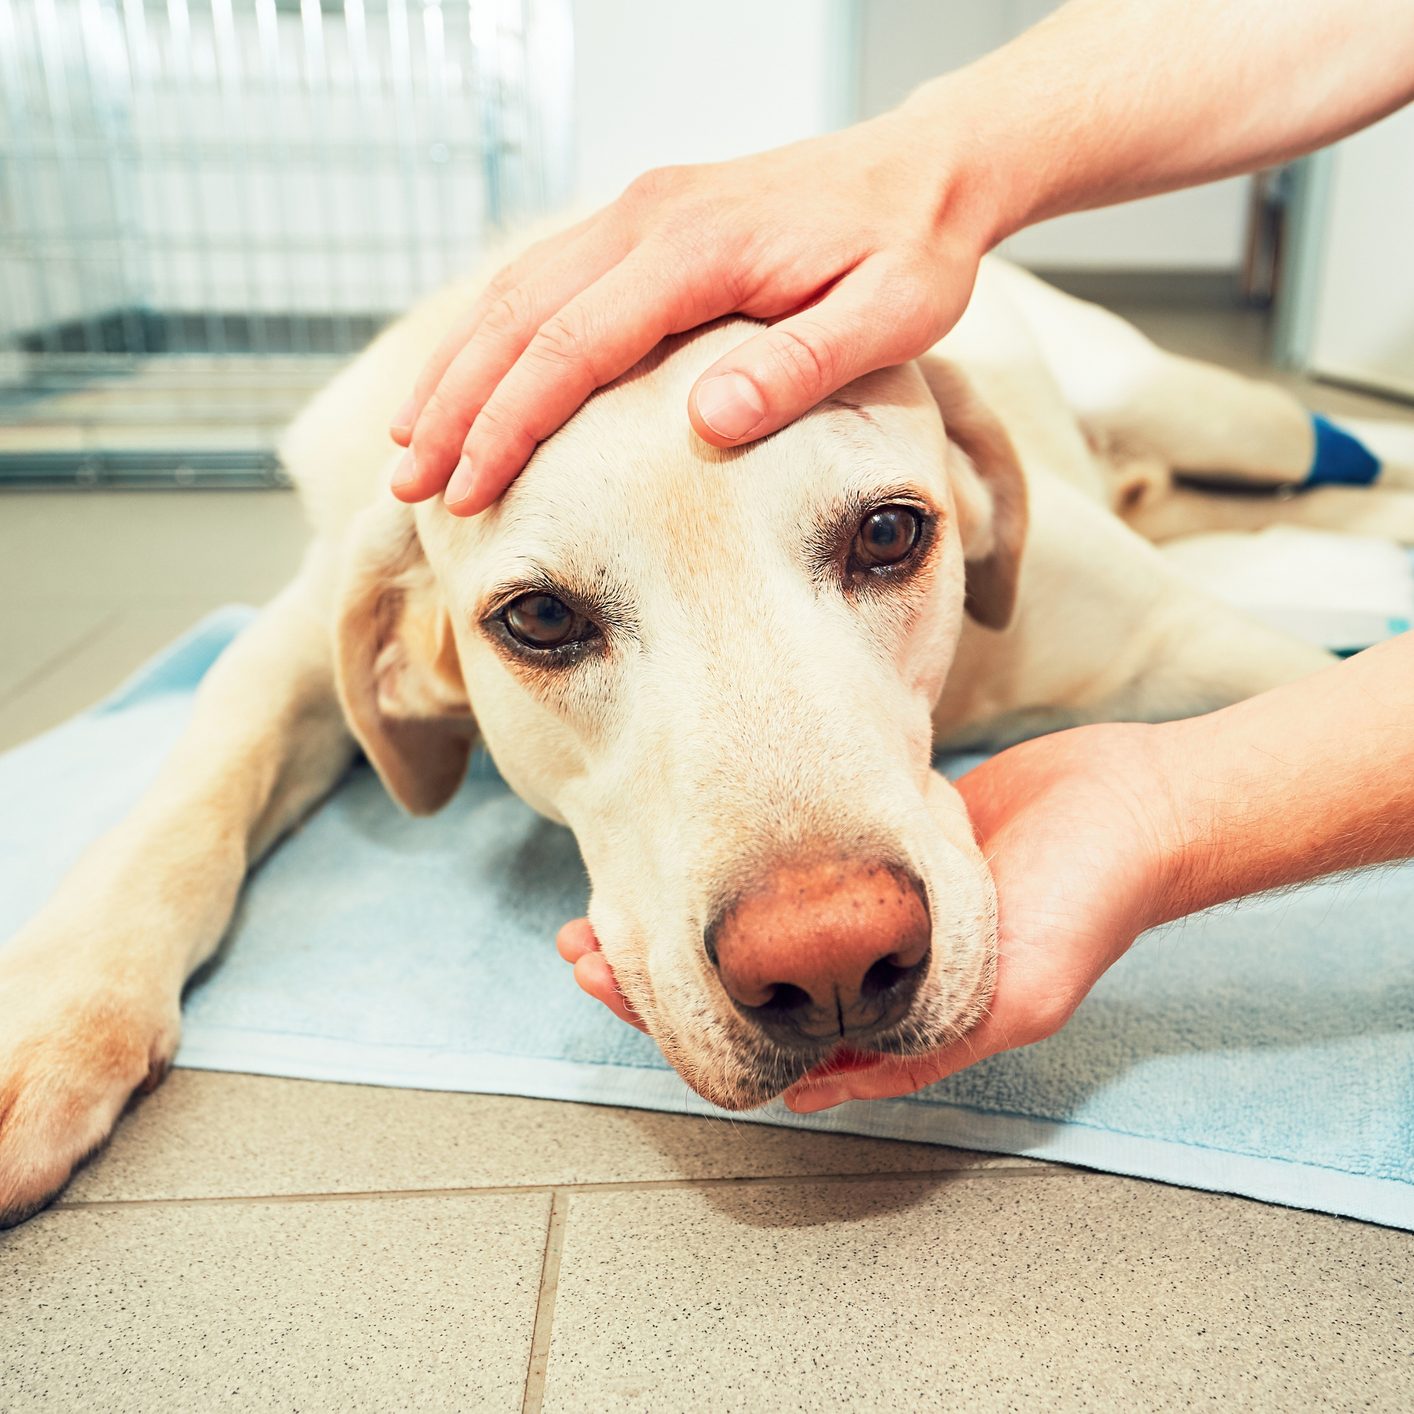 Dog awakening from anesthesia after tumor surgery. Ill labrador retriever in veterinary clinic.